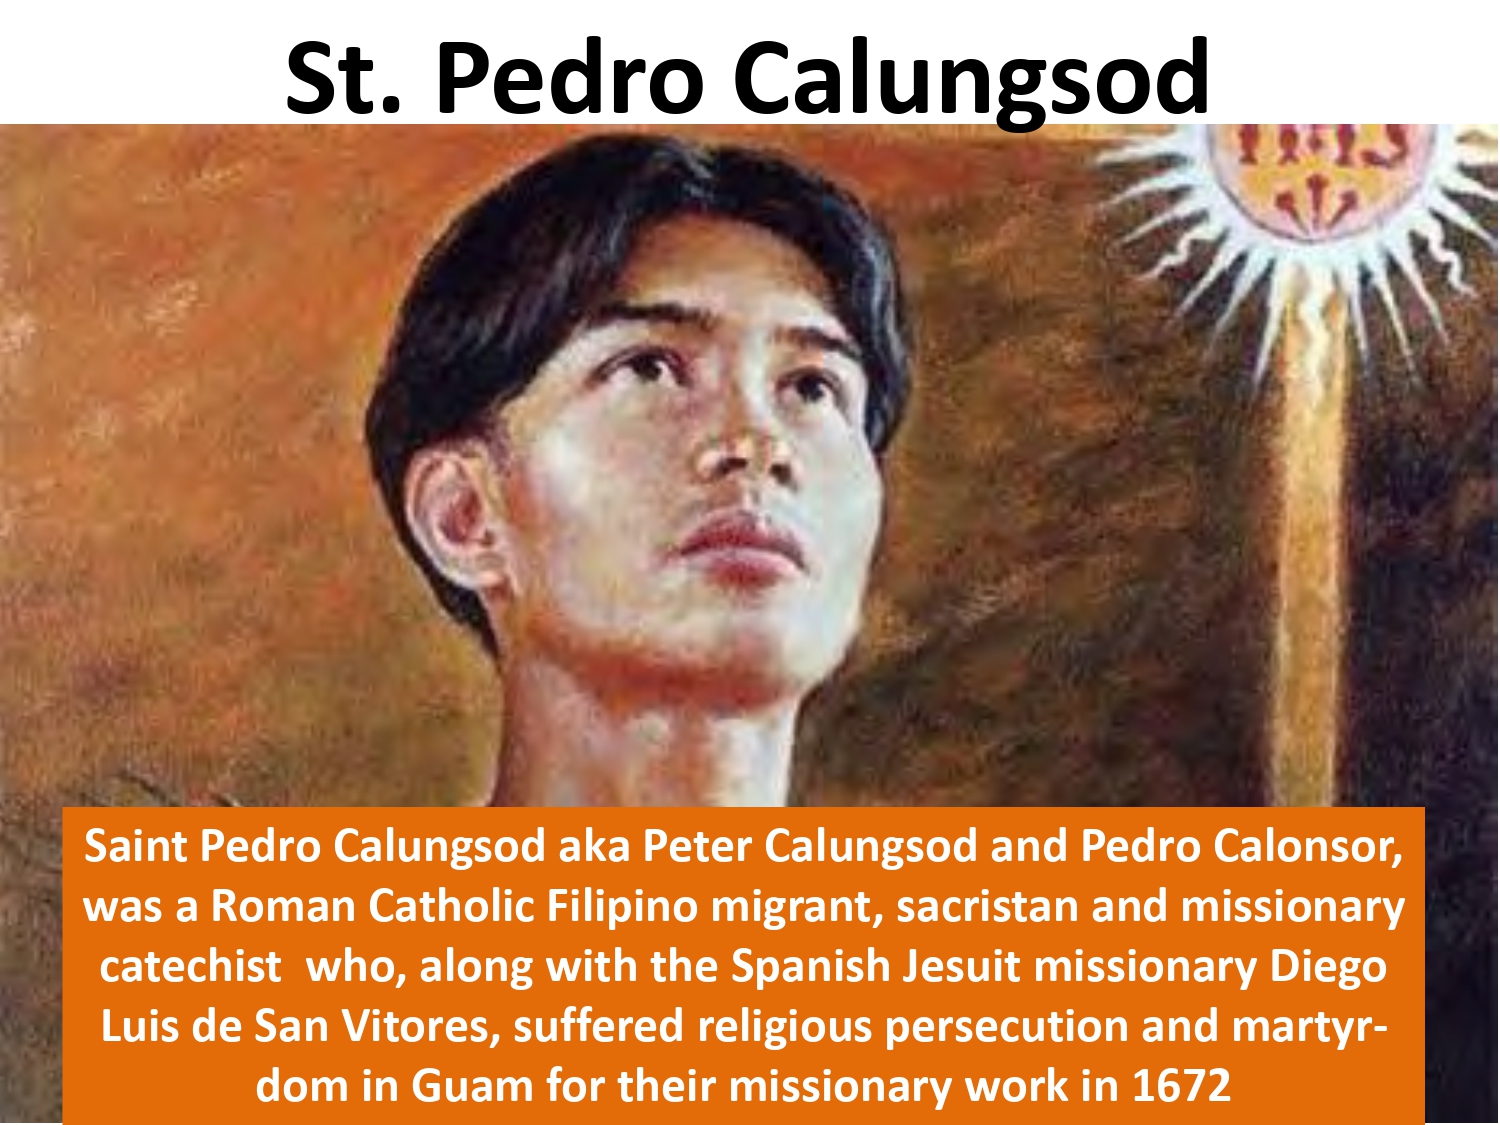 Saint Pedro Calungsod aka Peter Calungsod and Pedro Calonsor, was a Roman Catholic Filipino migrant, sacristan and missionary catechist who, along with the Spanish Jesuit missionary Diego Luis de San Vitores, suffered religious persecution and martyrdom in Guam for their missionary work in 1672